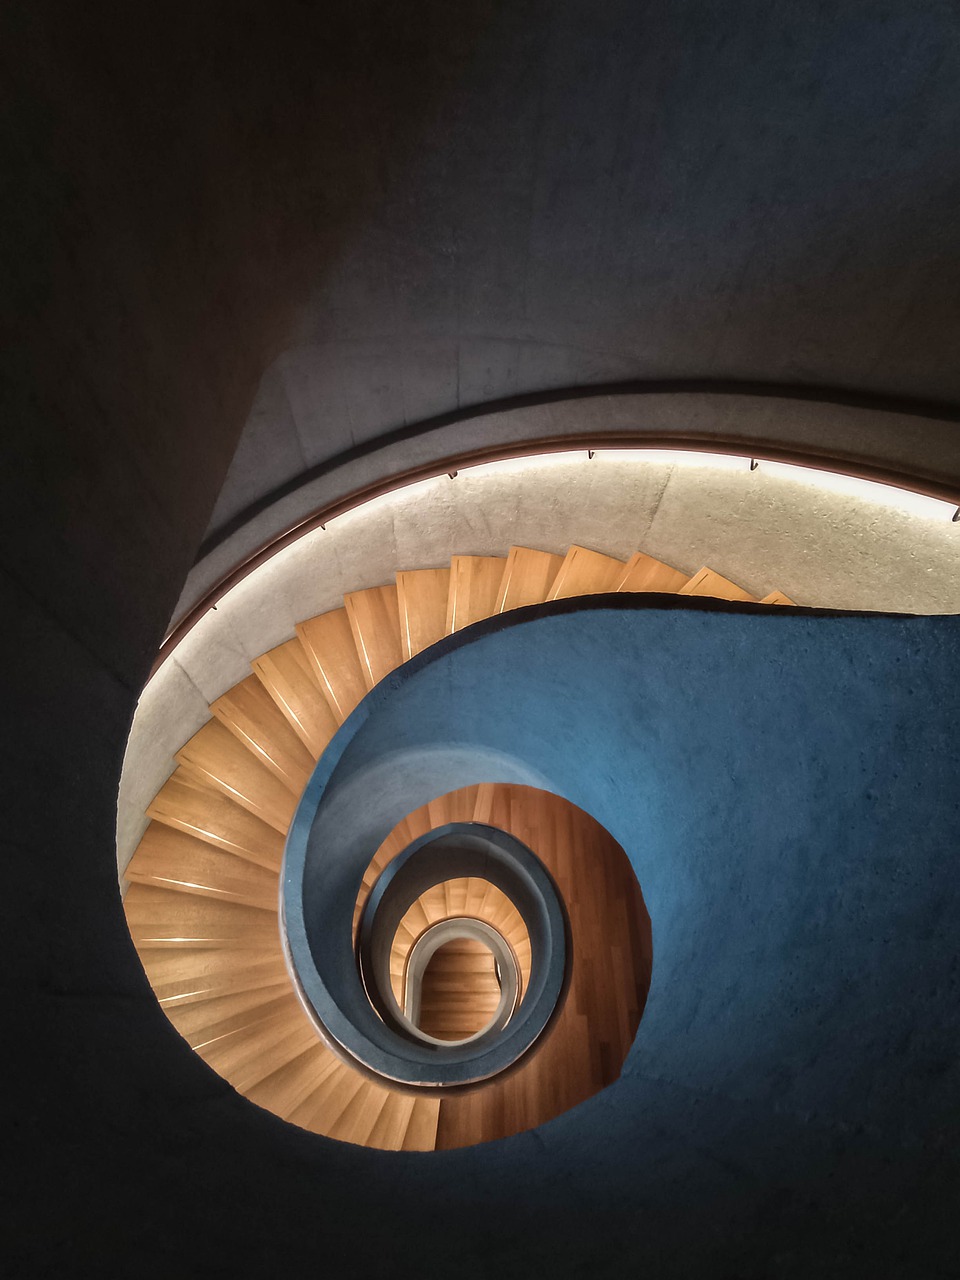 staircase, spiral staircase, stairs-7718335.jpg